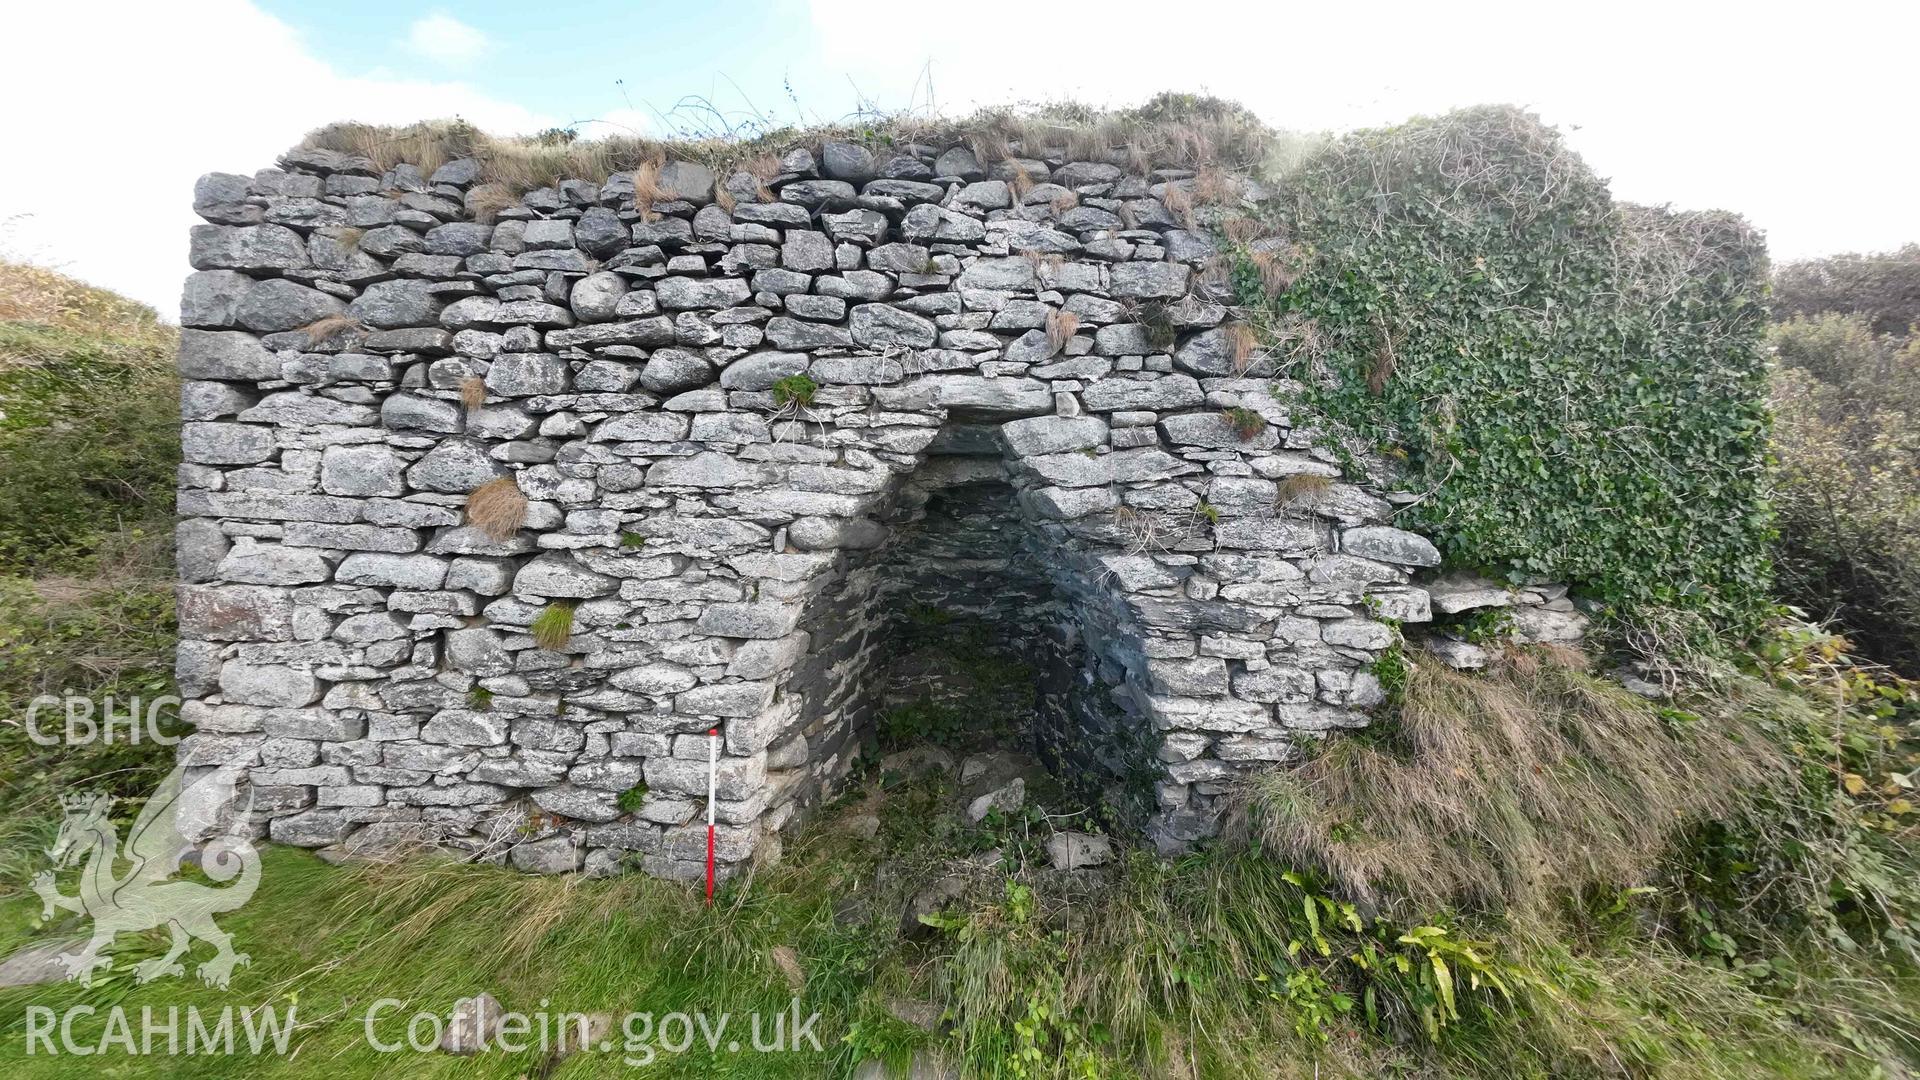 Digital colour photograph showing Craiglas Lime Kilns - lime Kiln 2, north-west (seaward) facing elevation, overall view.